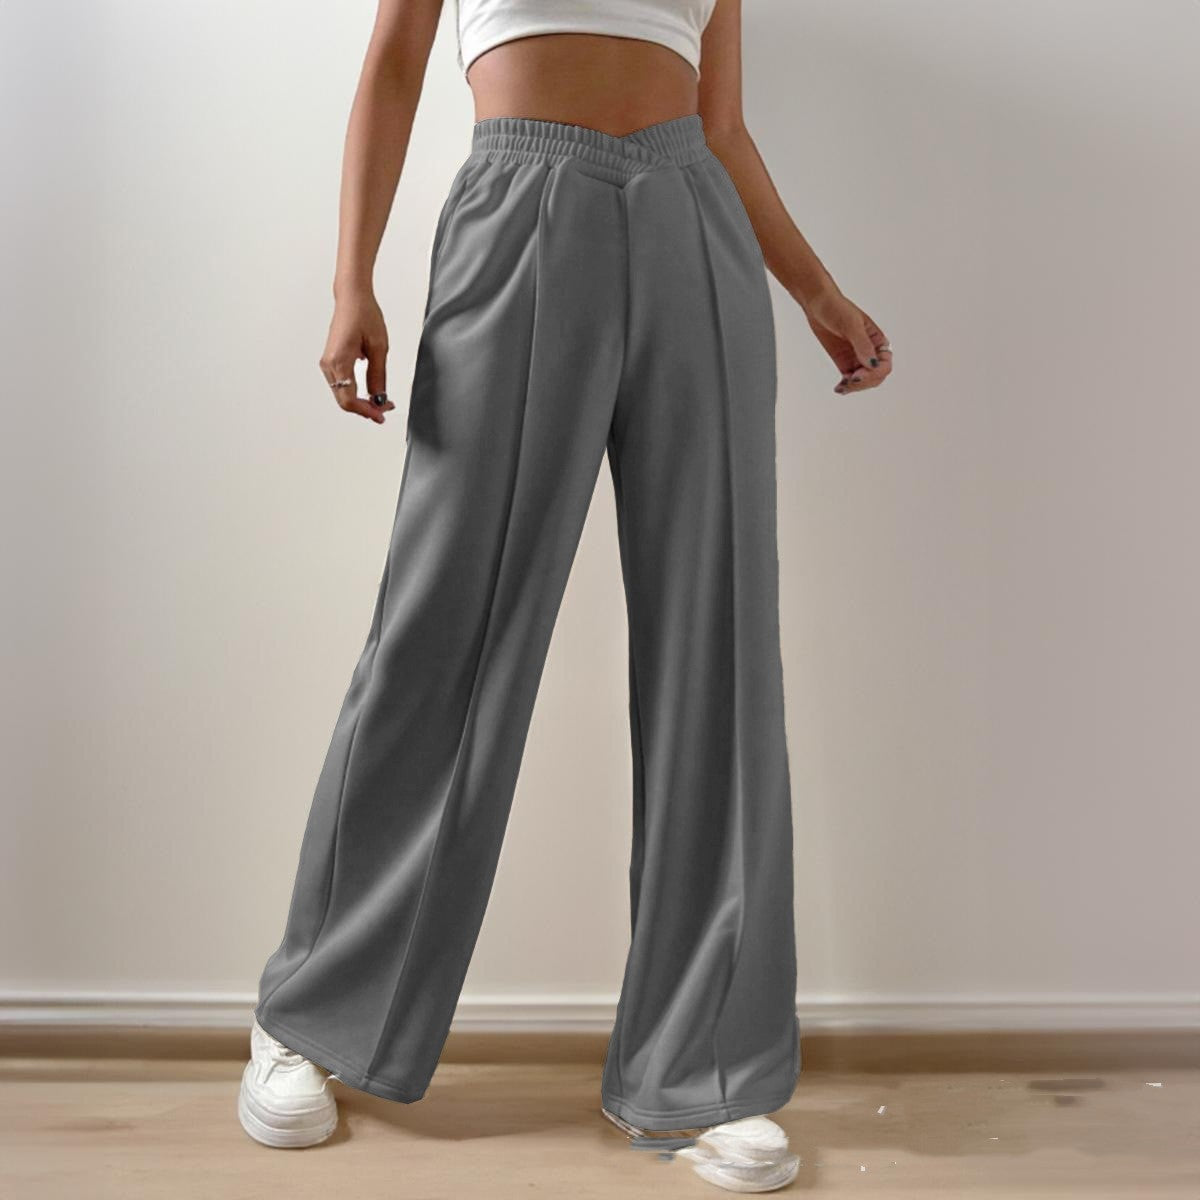 Women's Loose Casual Trousers Comfortable Home